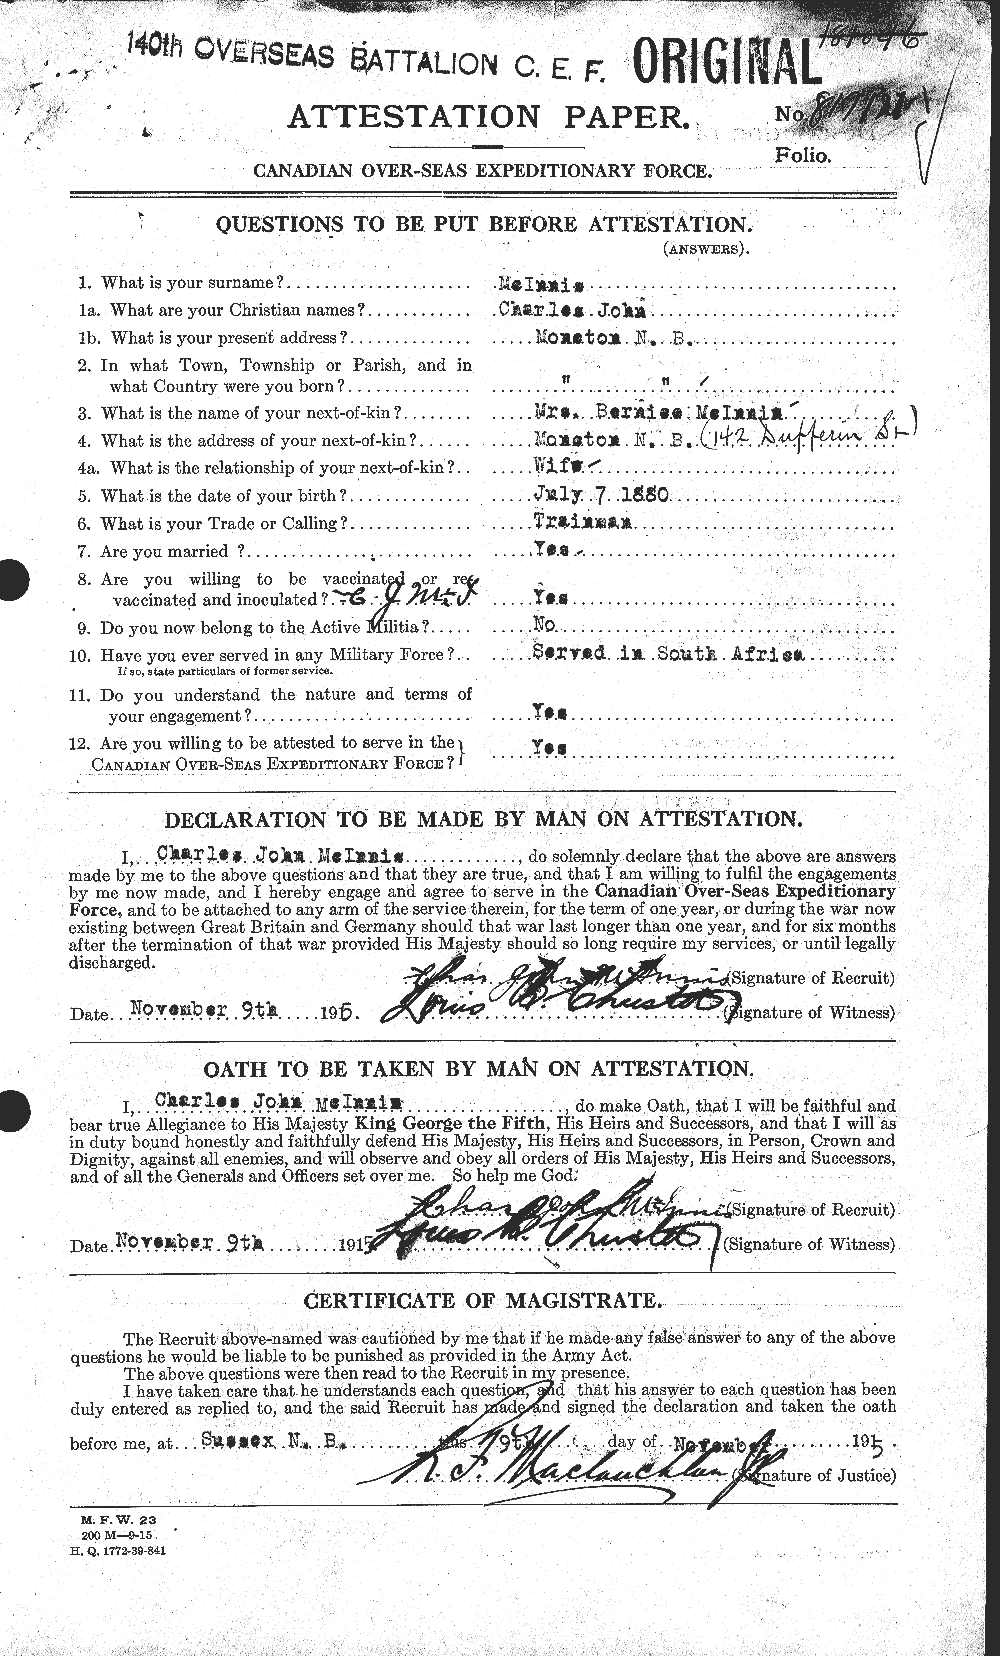 Personnel Records of the First World War - CEF 526772a